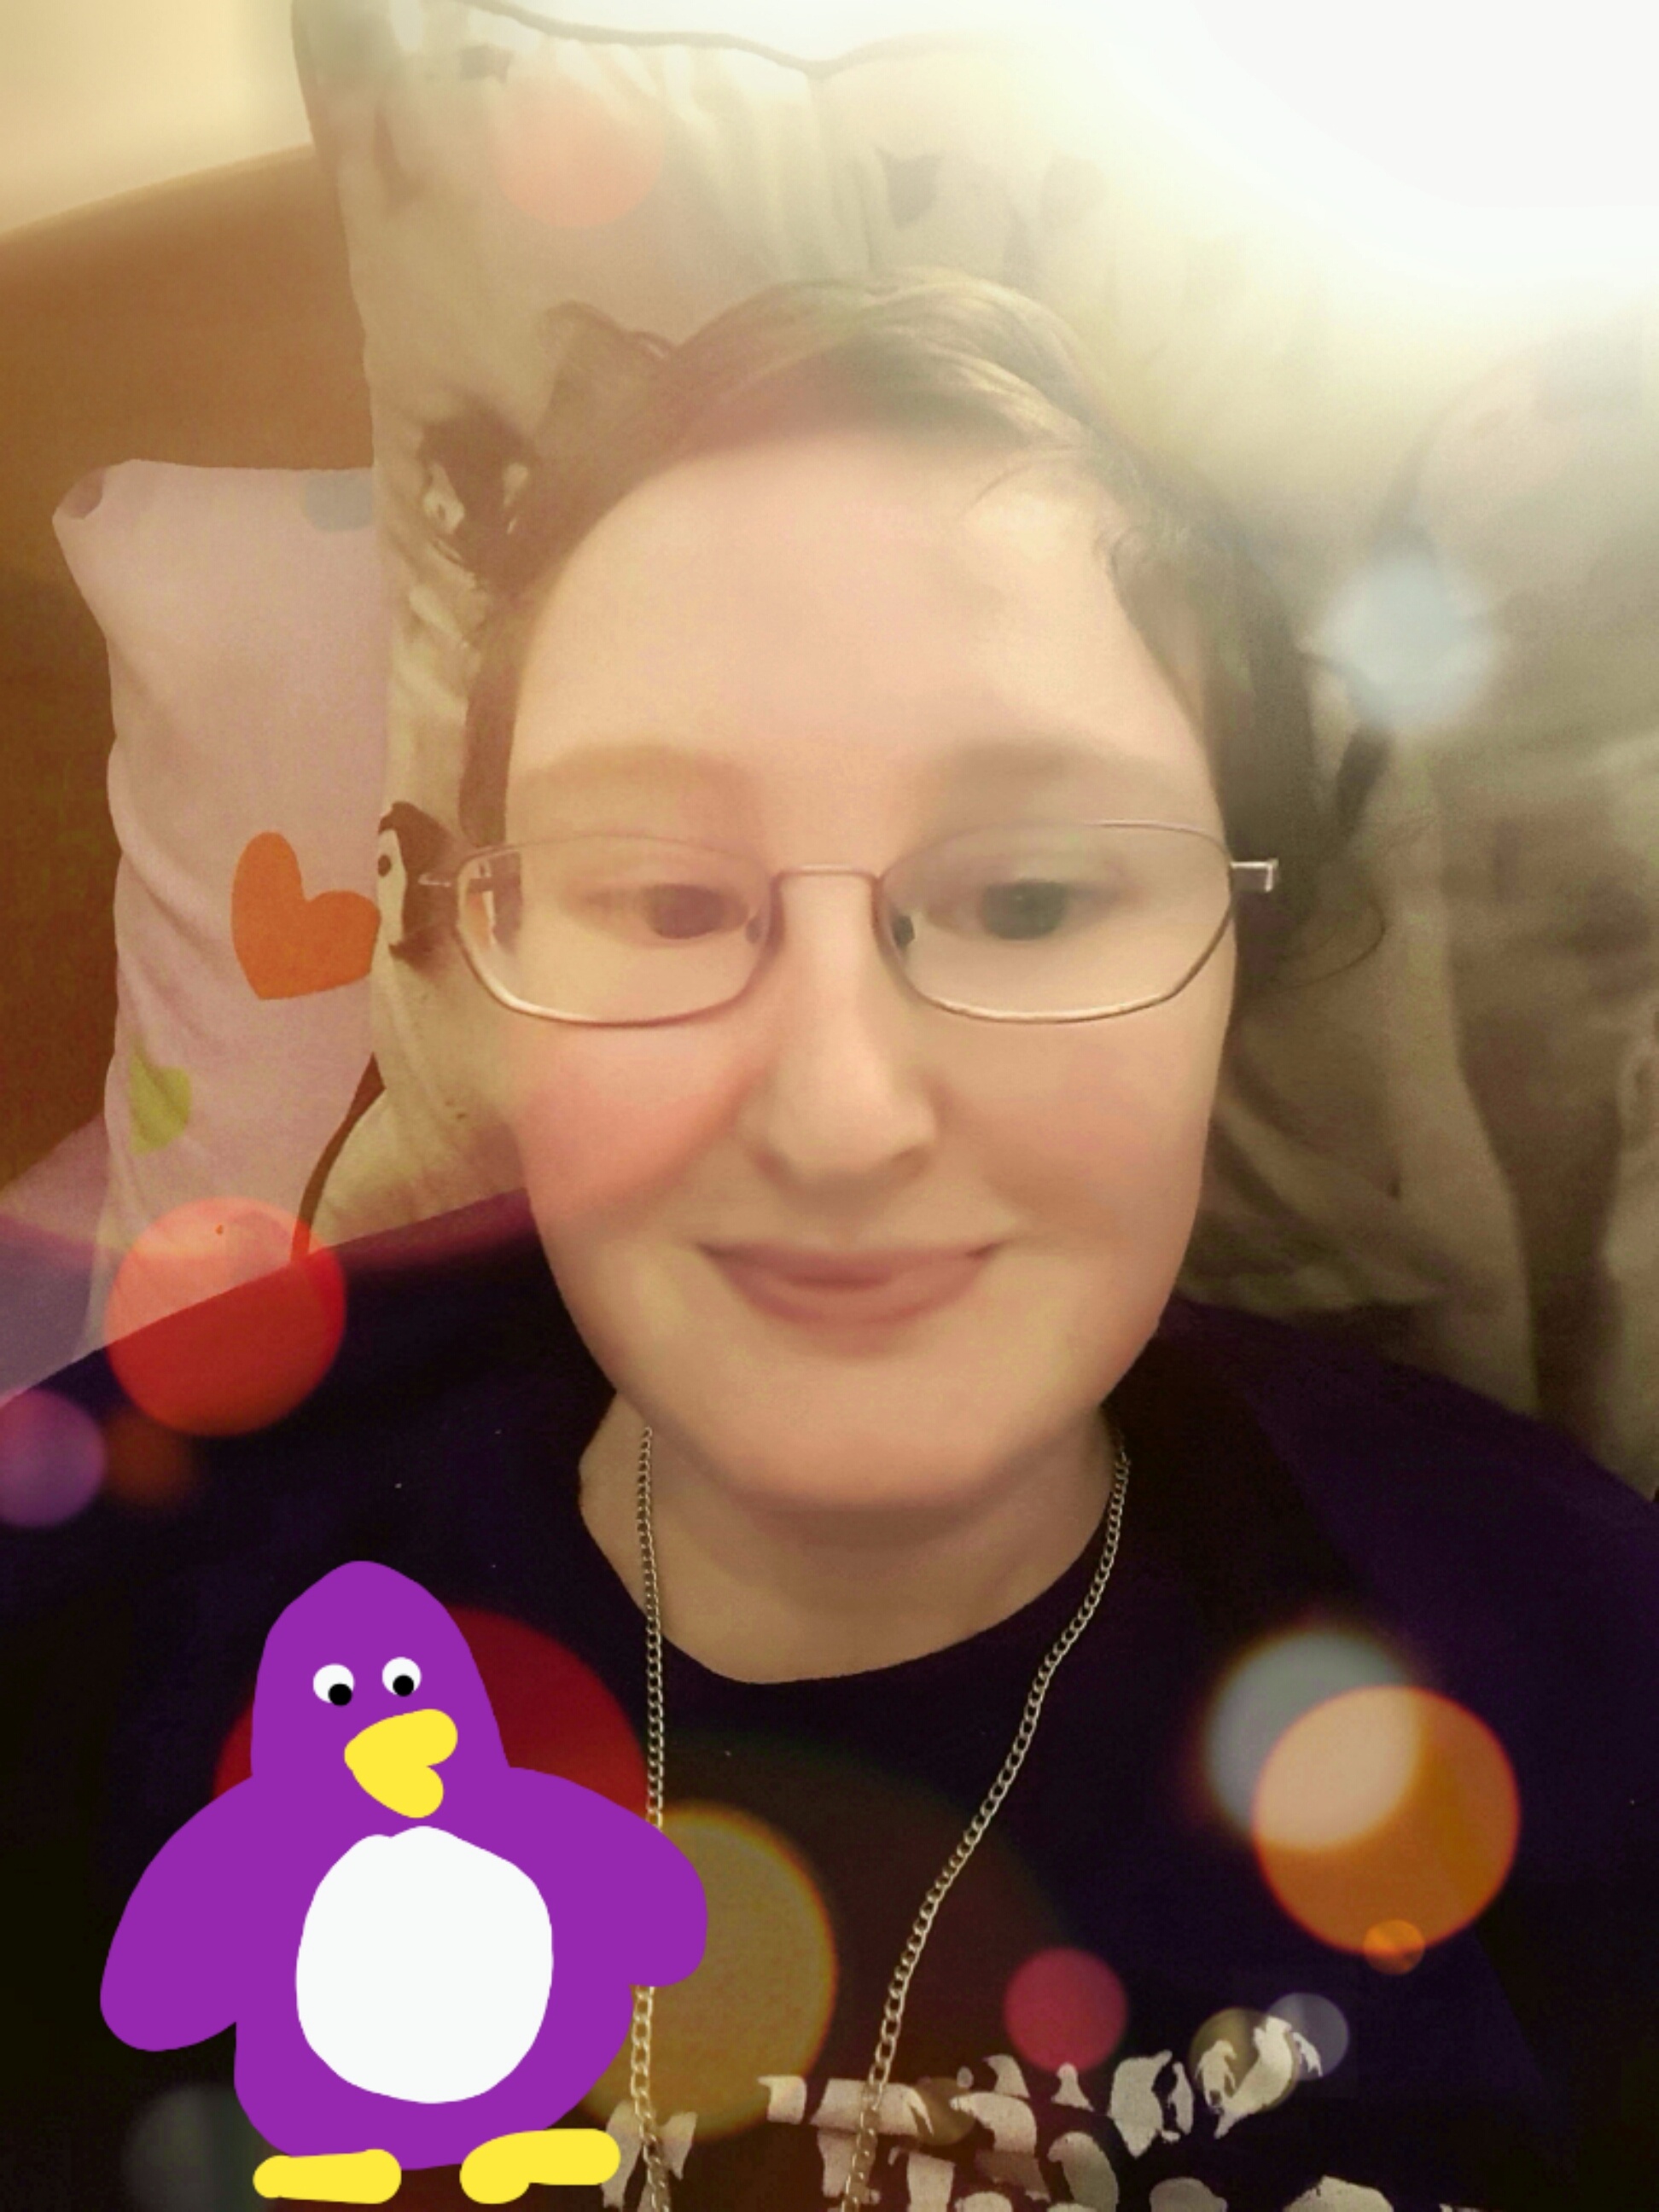 Danni is lying in bed. The image has been edited with various filters, making it look smooth, have bigger eyes, has colourful circles around their head, and has a hand drawn purple penguin in the bottom left corner. 